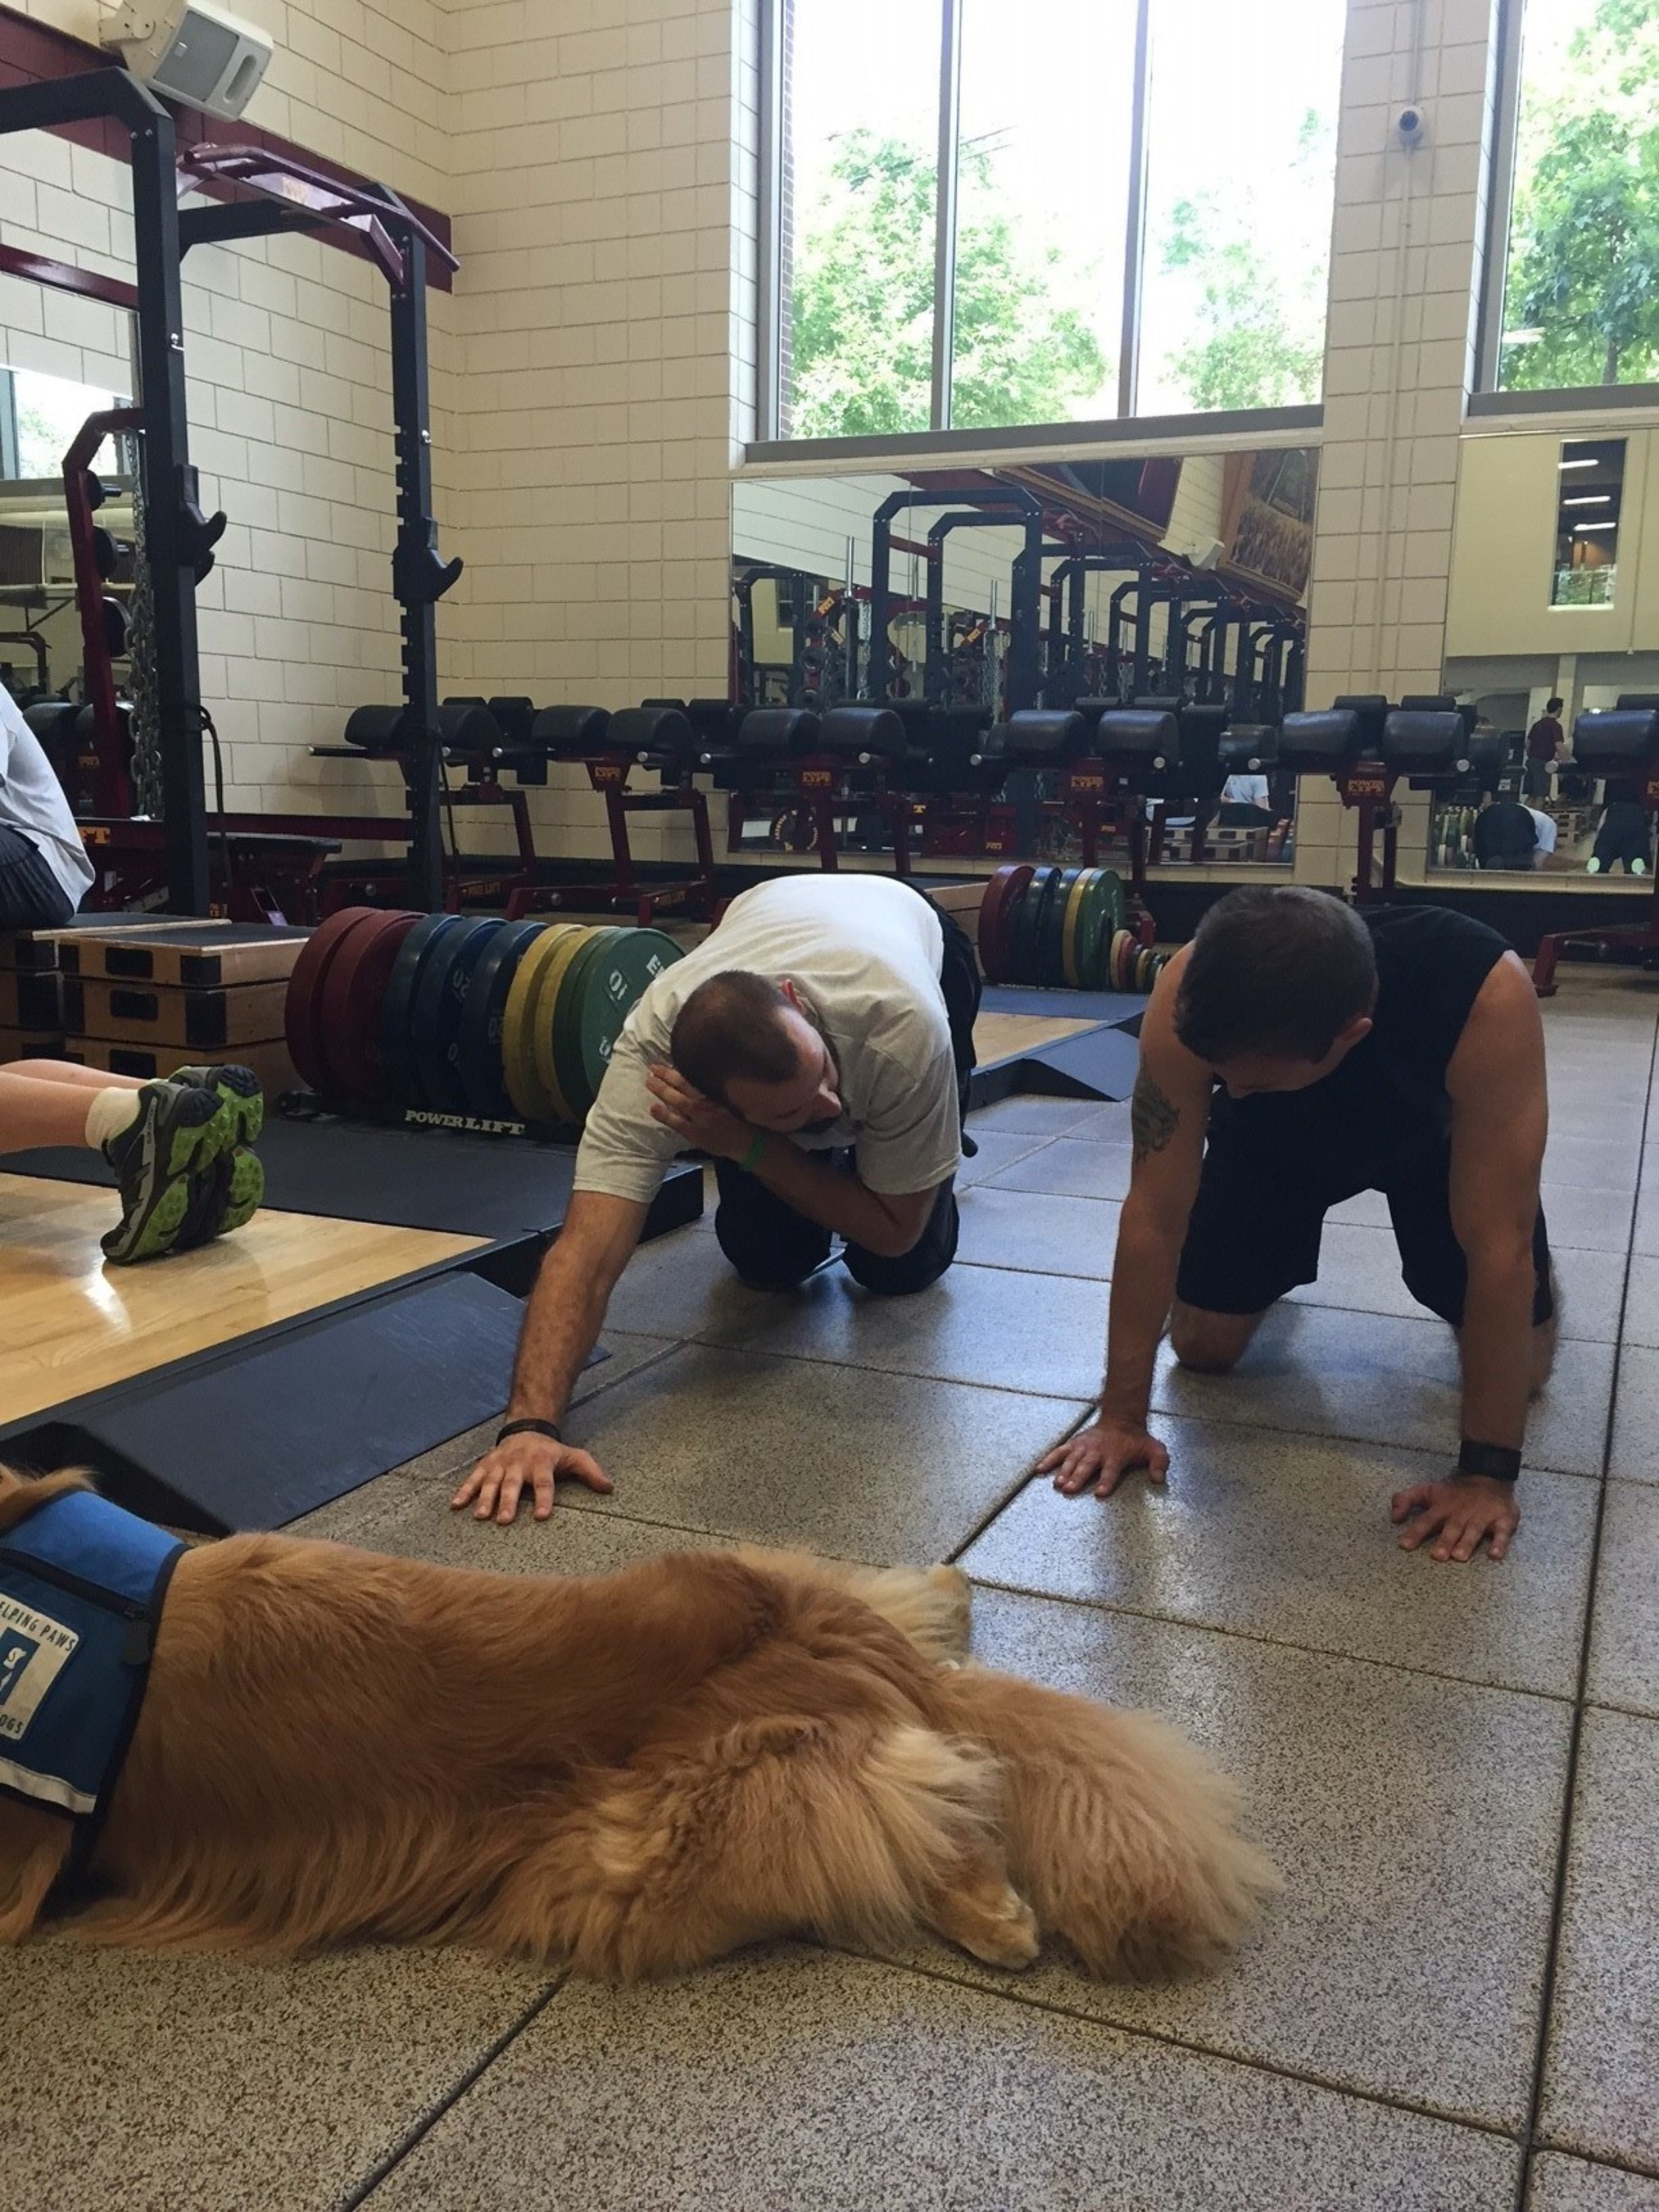 Warriors and a service dog participate in specialized training during a workout at the University of Minnesota. The event sponsored by Wounded Warrior Project.